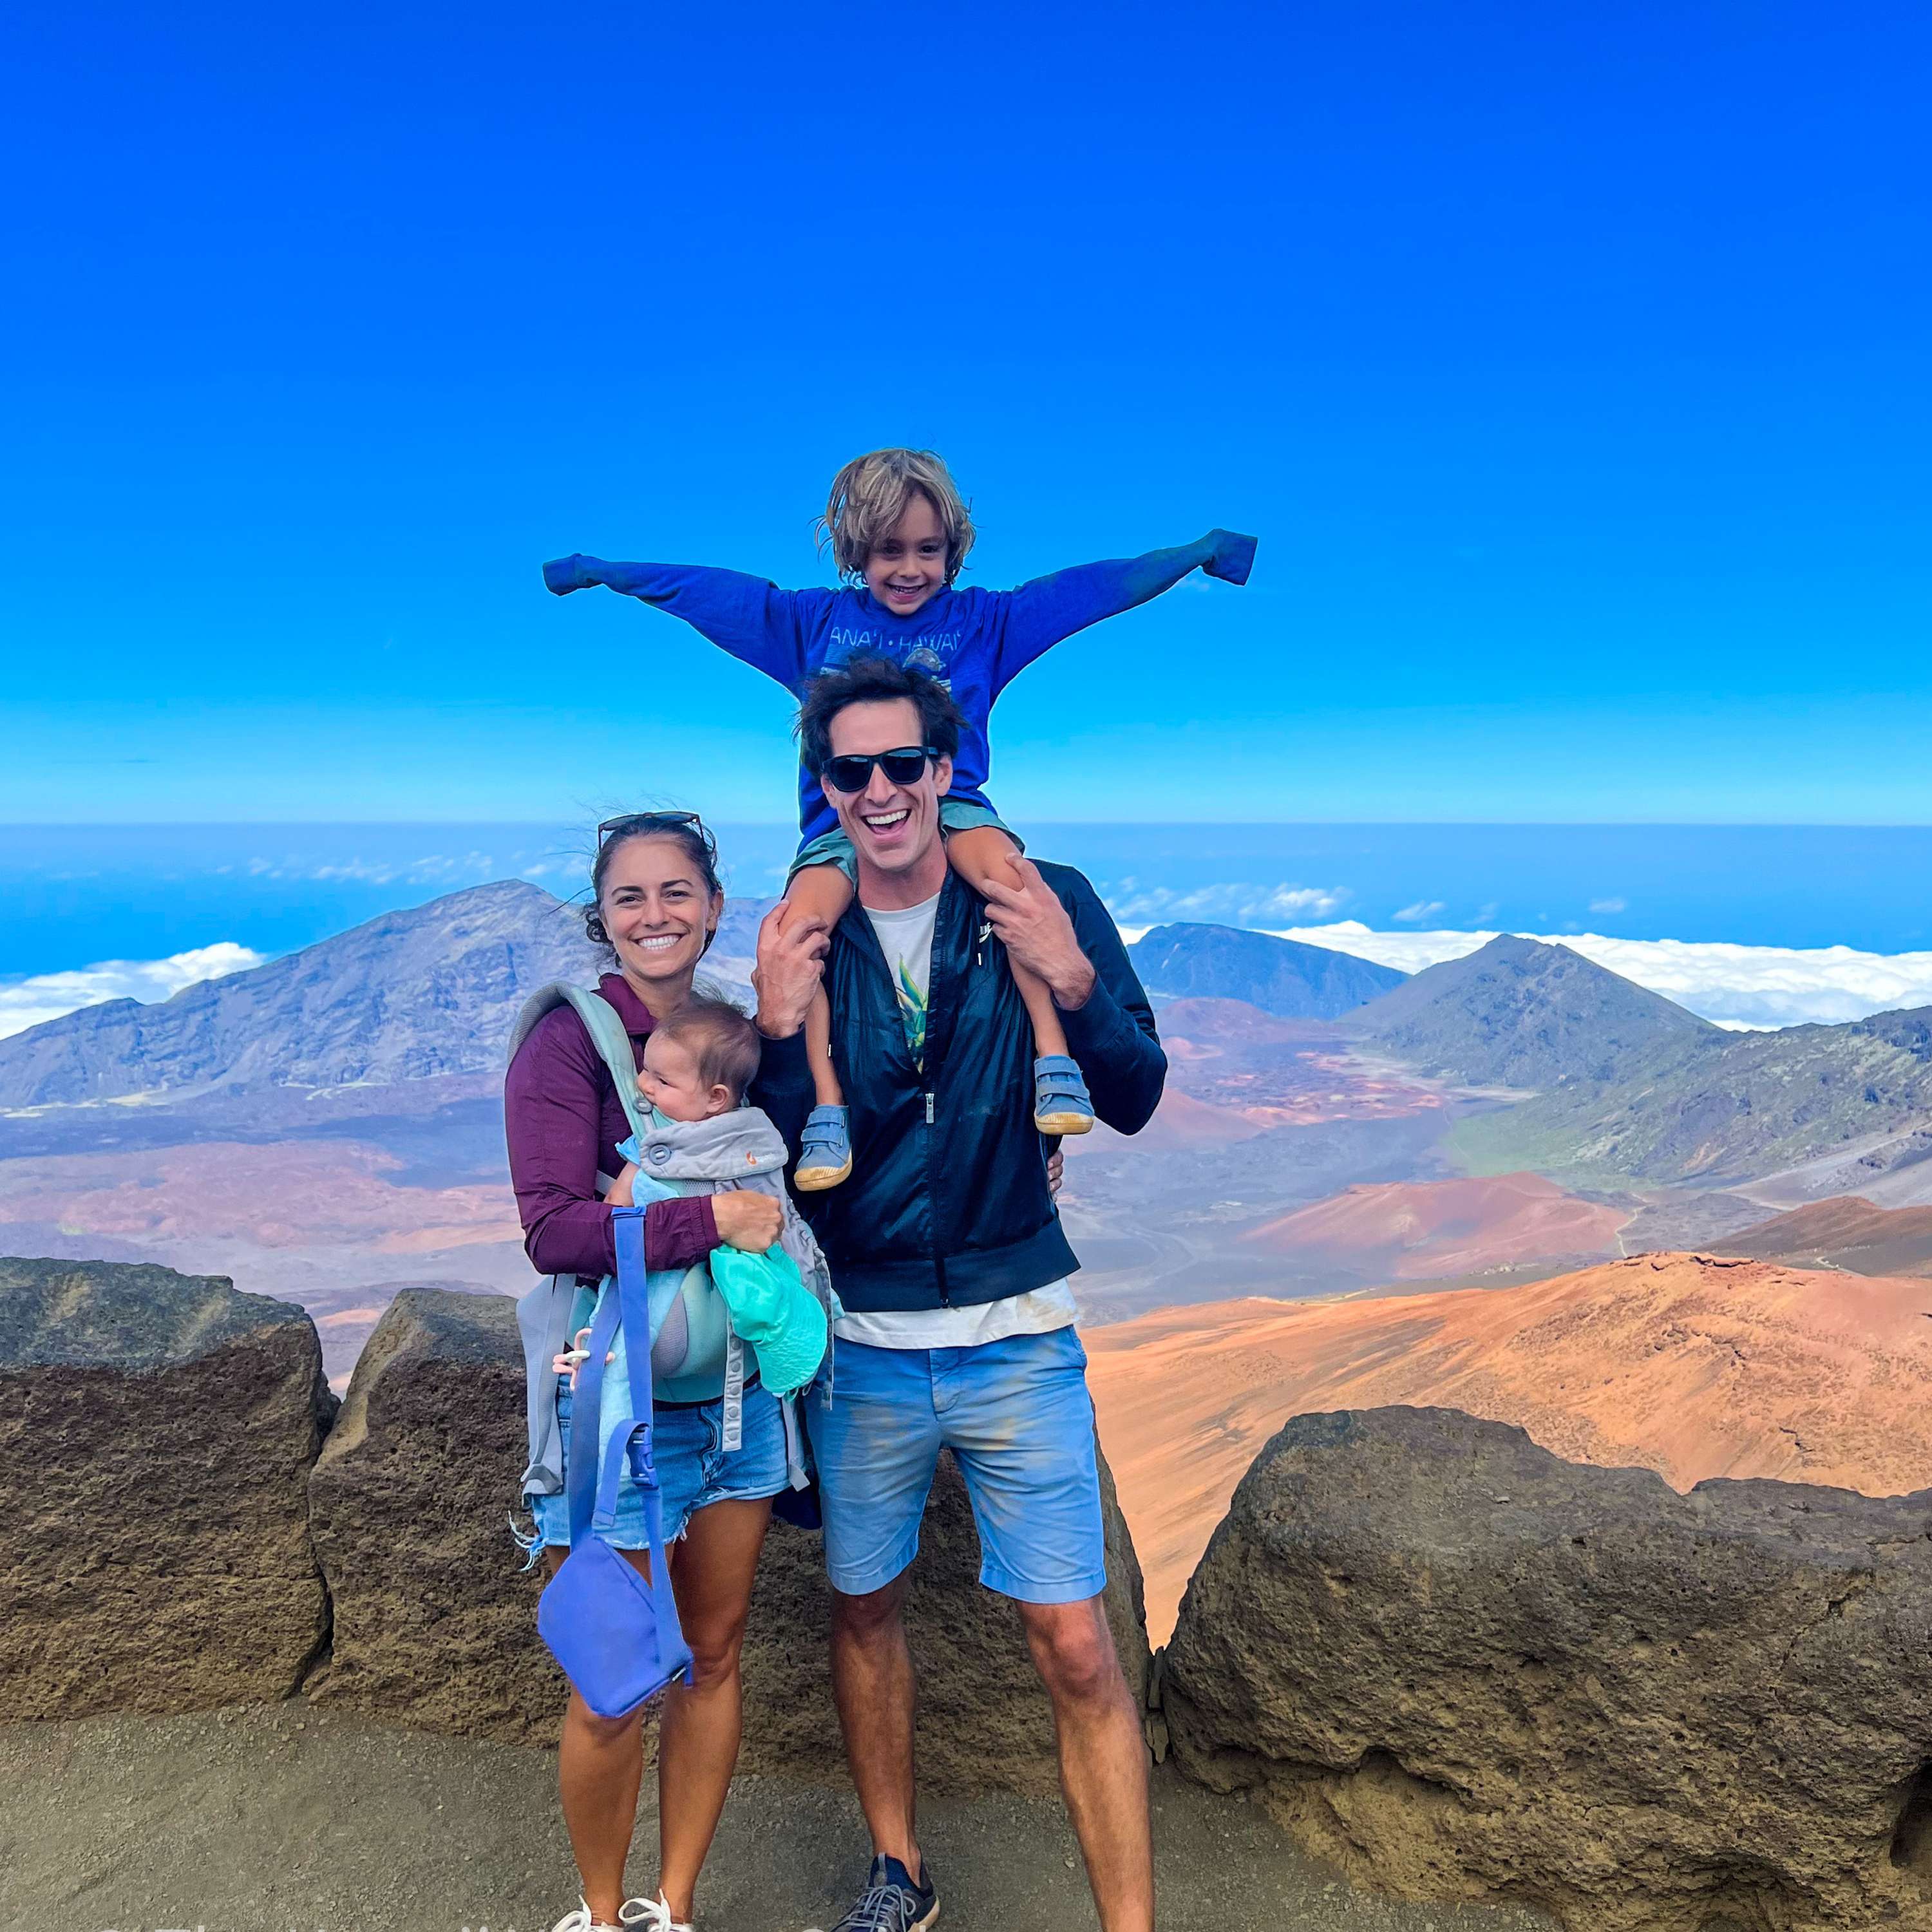 96 | Insider Tips for Planning an Epic Hawaii Vacation with Jordan & Erica of Hawaii Vacation Guide